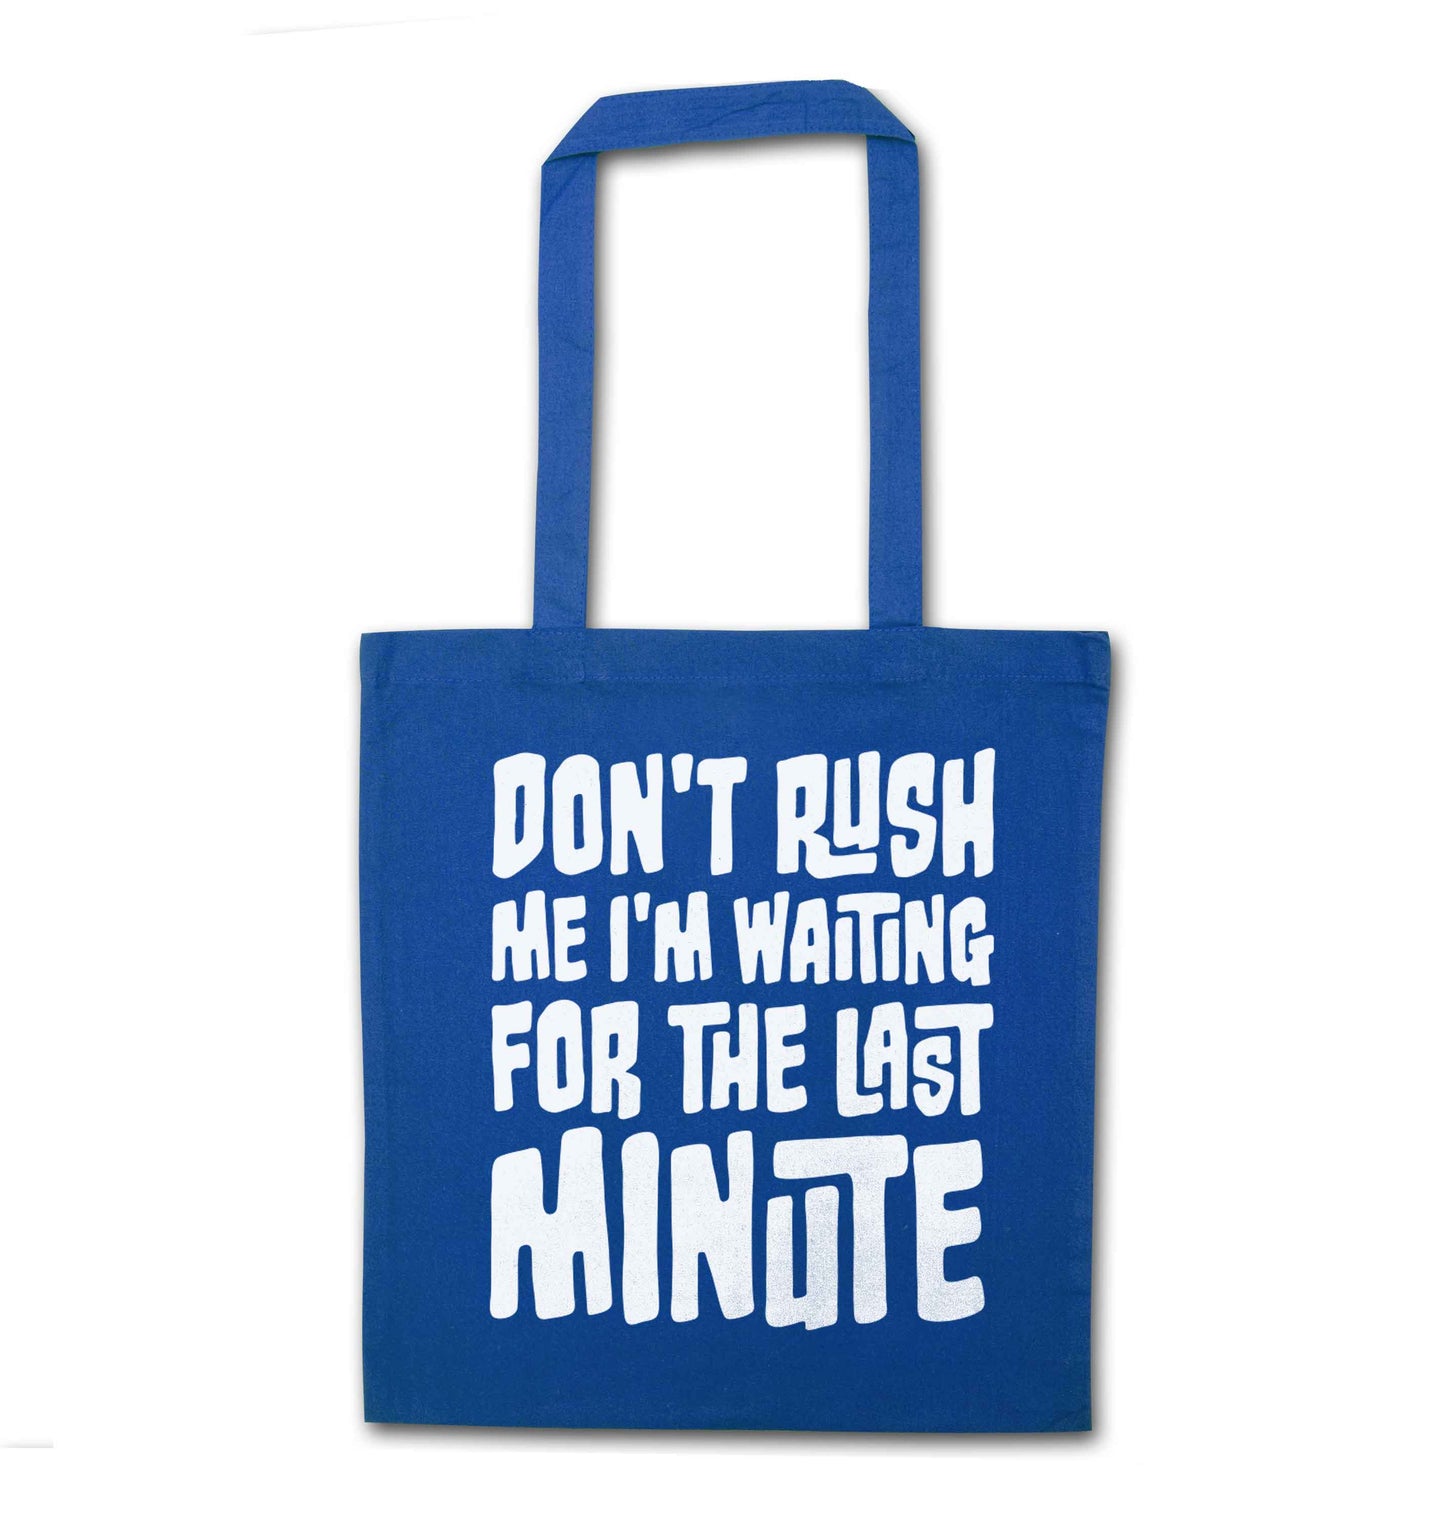 Don't rush me I'm waiting for the last minute blue tote bag